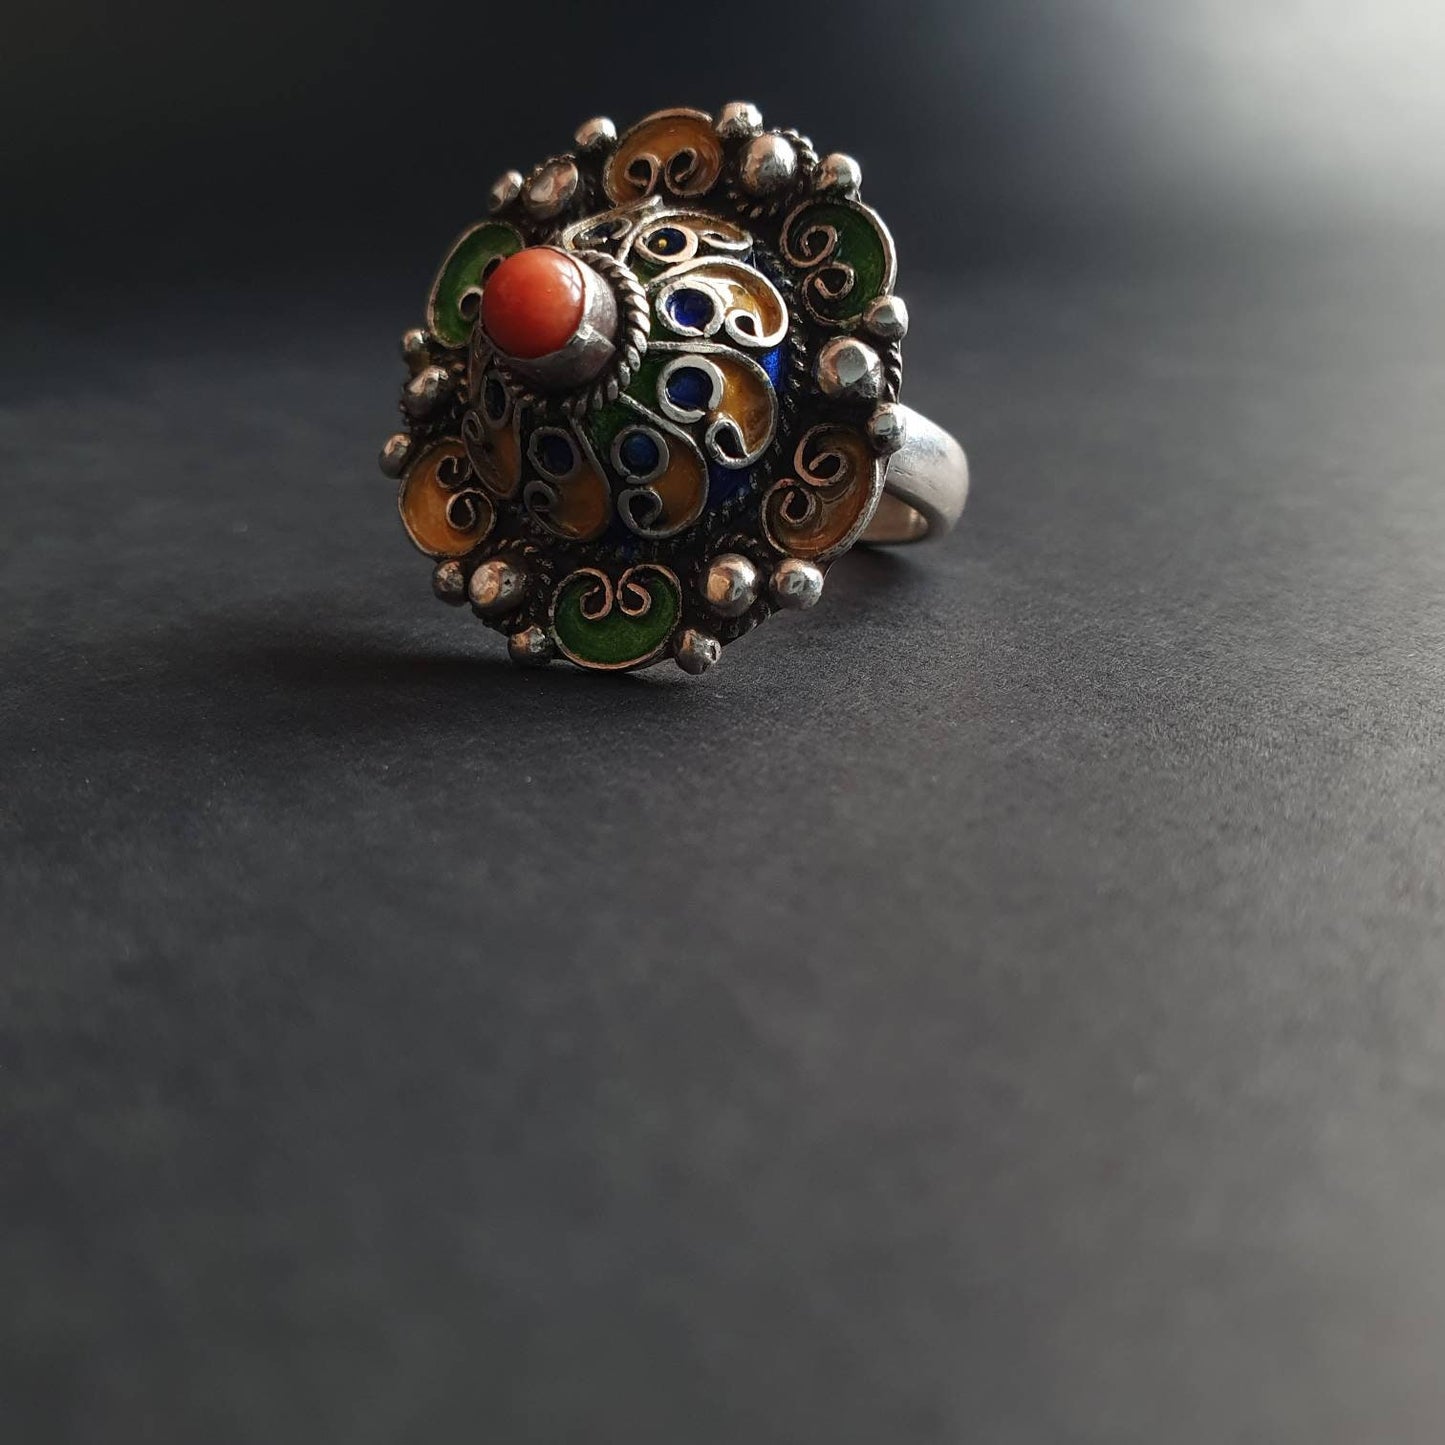 Statement ring, sterling silver ring, enamel ring, sterling silver jewellery, gift's, vintage, handmade, ethnic, tribal jewelry,